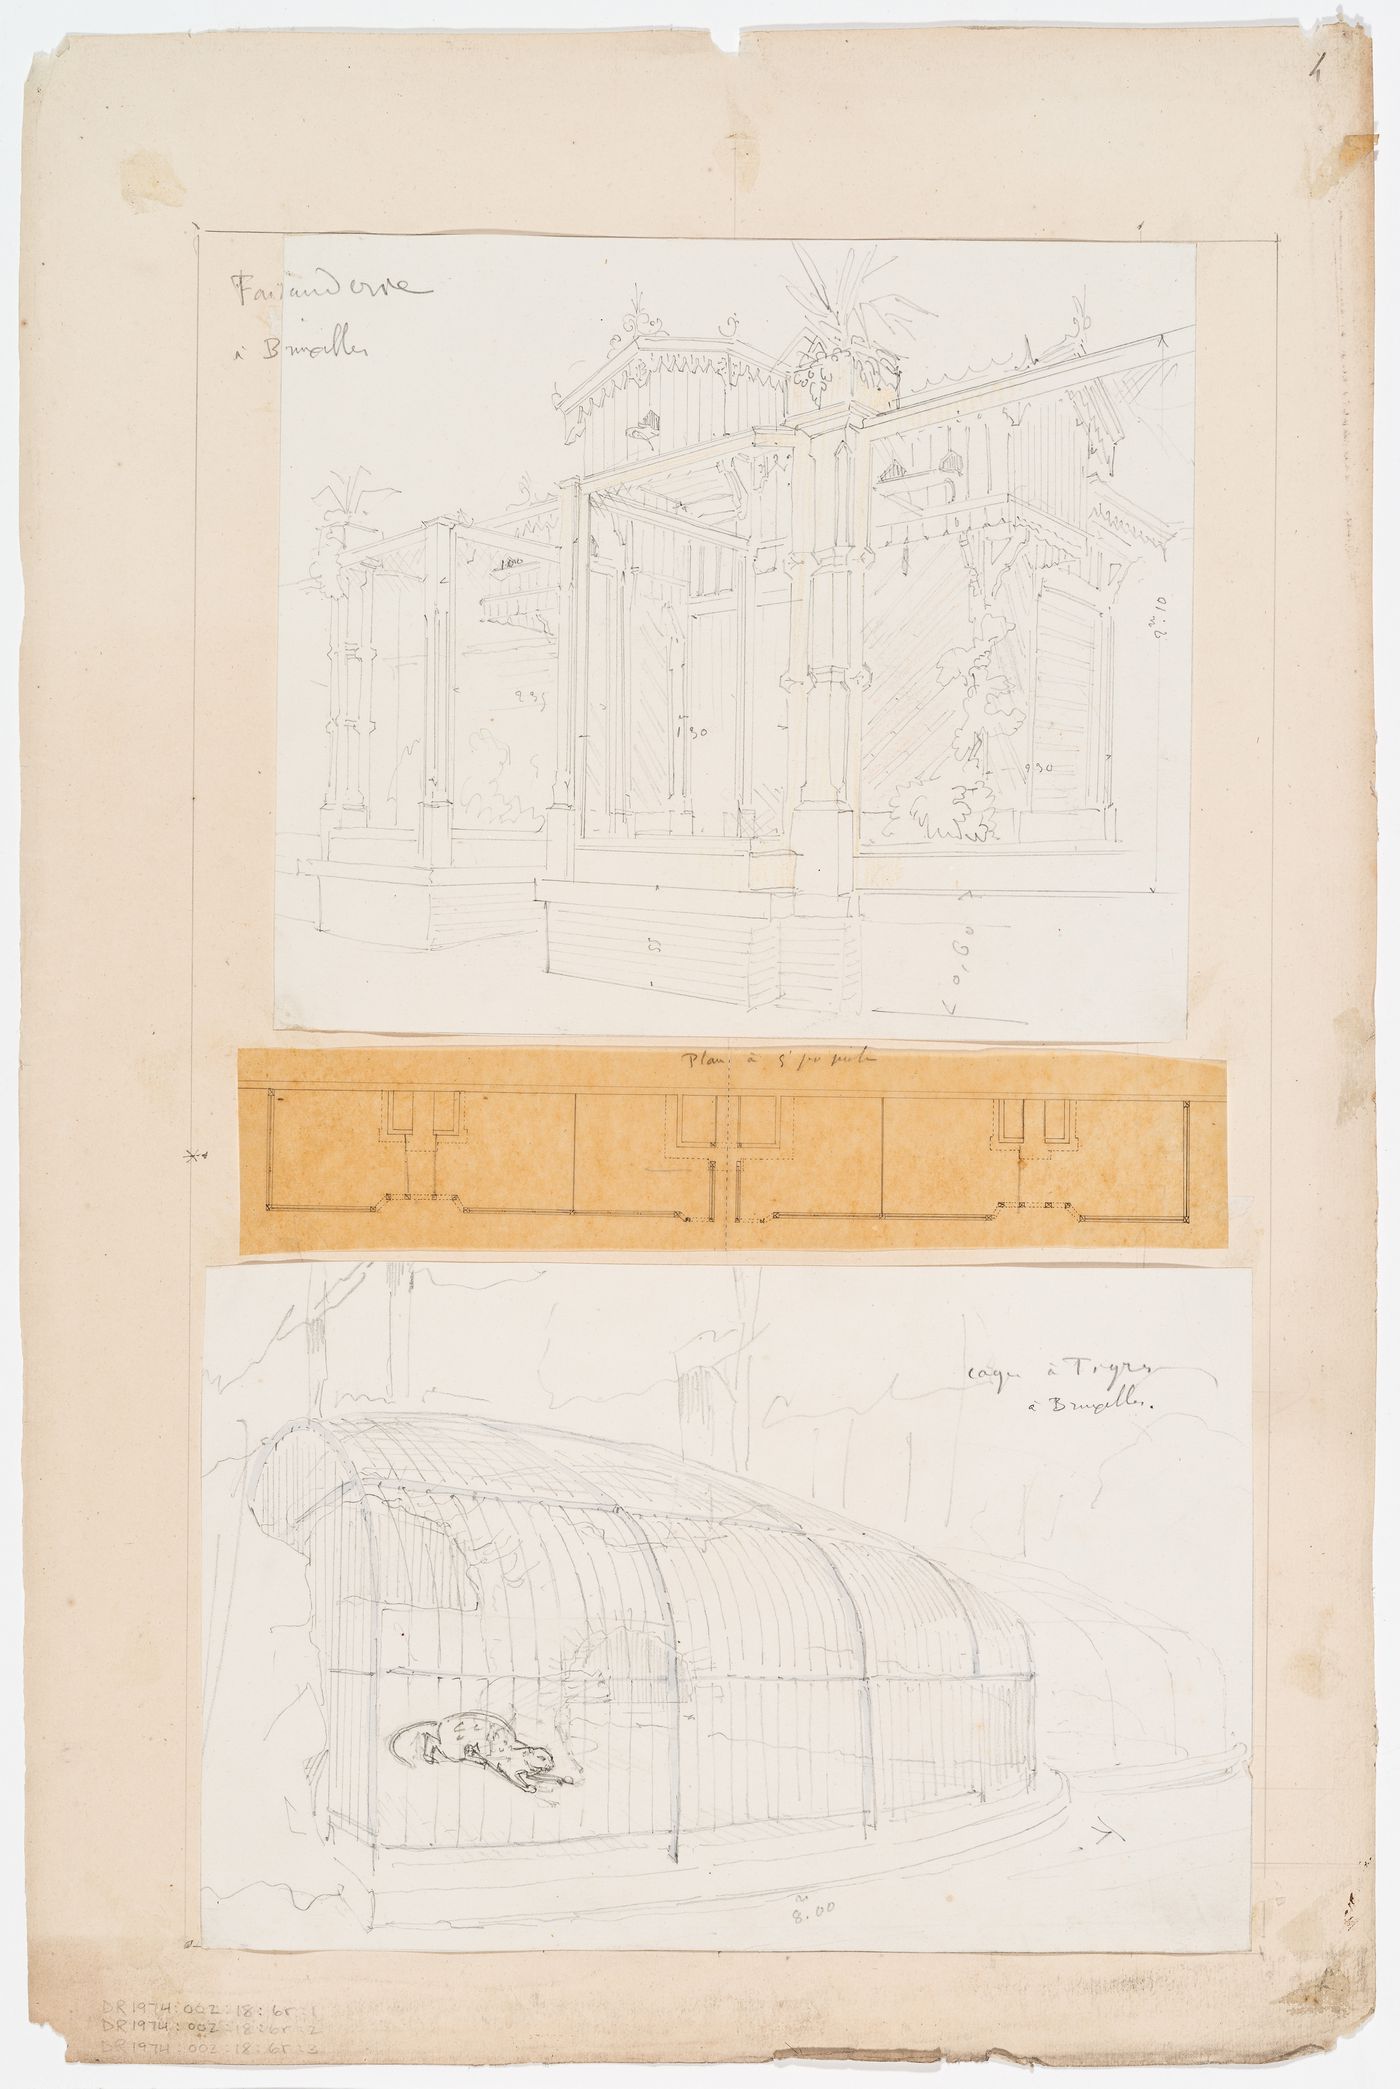 Zoological garden, Brussels: Sketch perspective and plan of an aviary and a sketch of the tiger cage